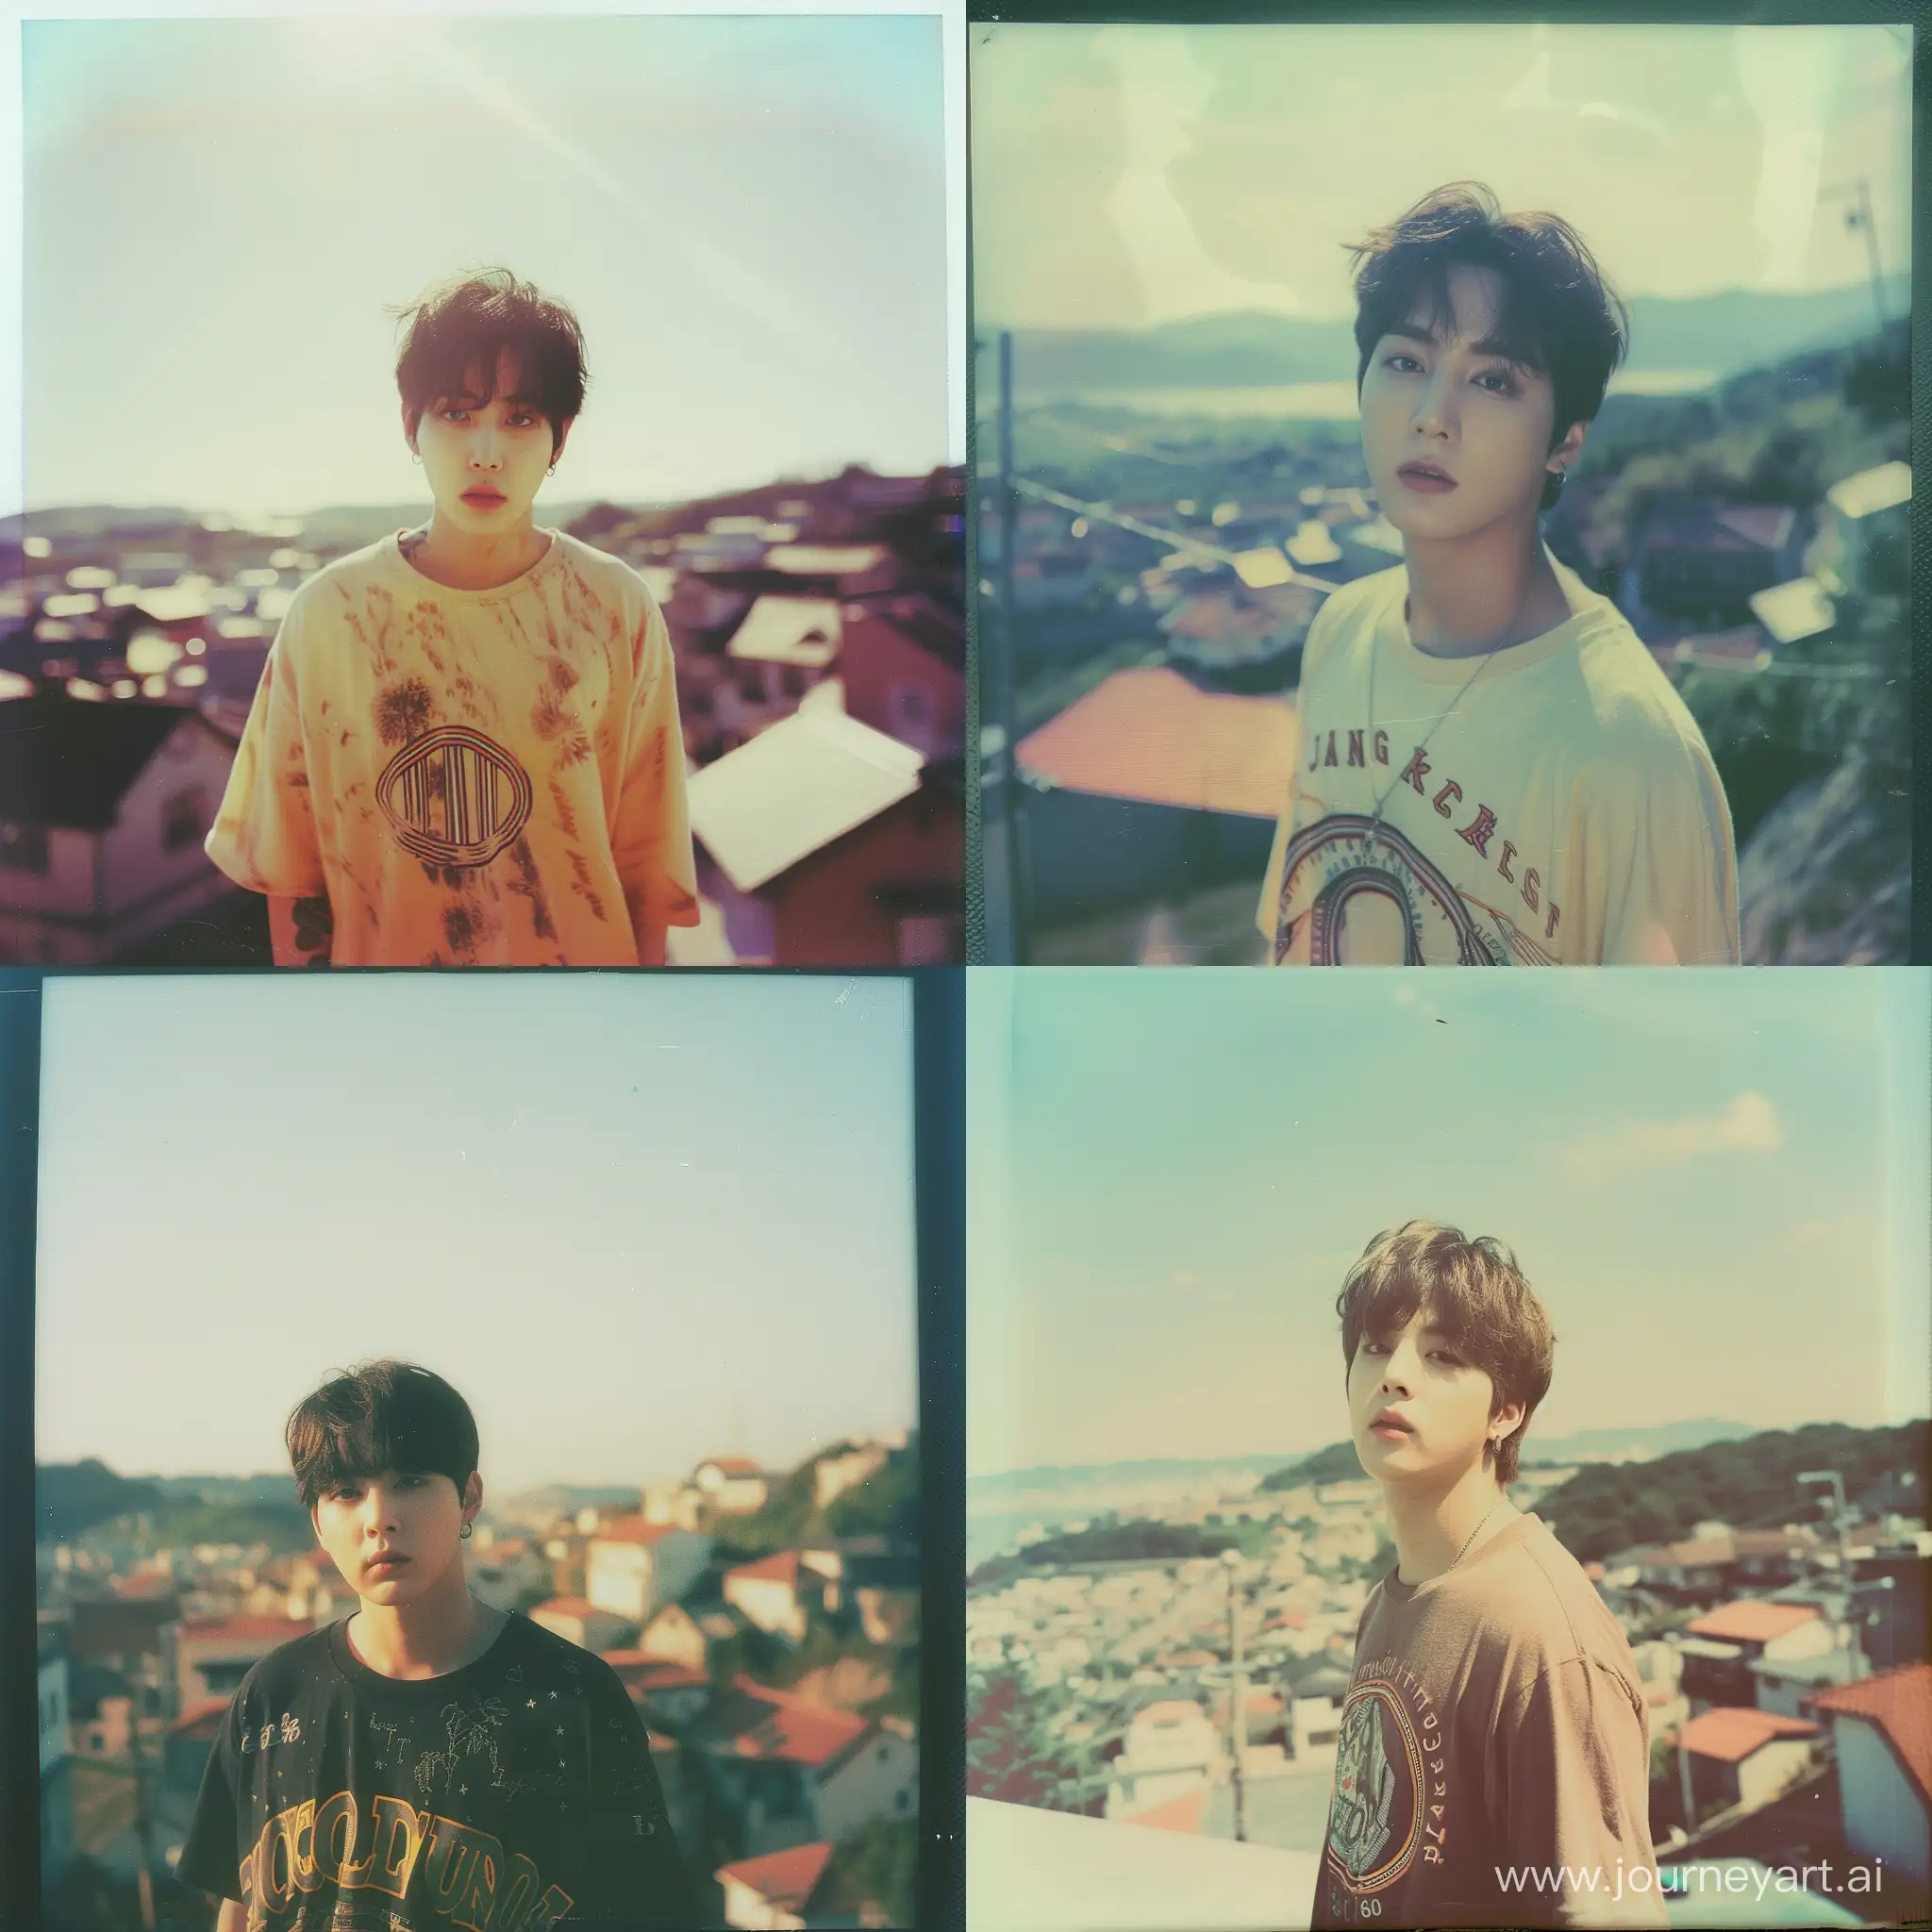 Vintage-Polaroid-Portrait-Jungkook-in-Ringer-Tee-Shirt-Amidst-Sunny-Townscape